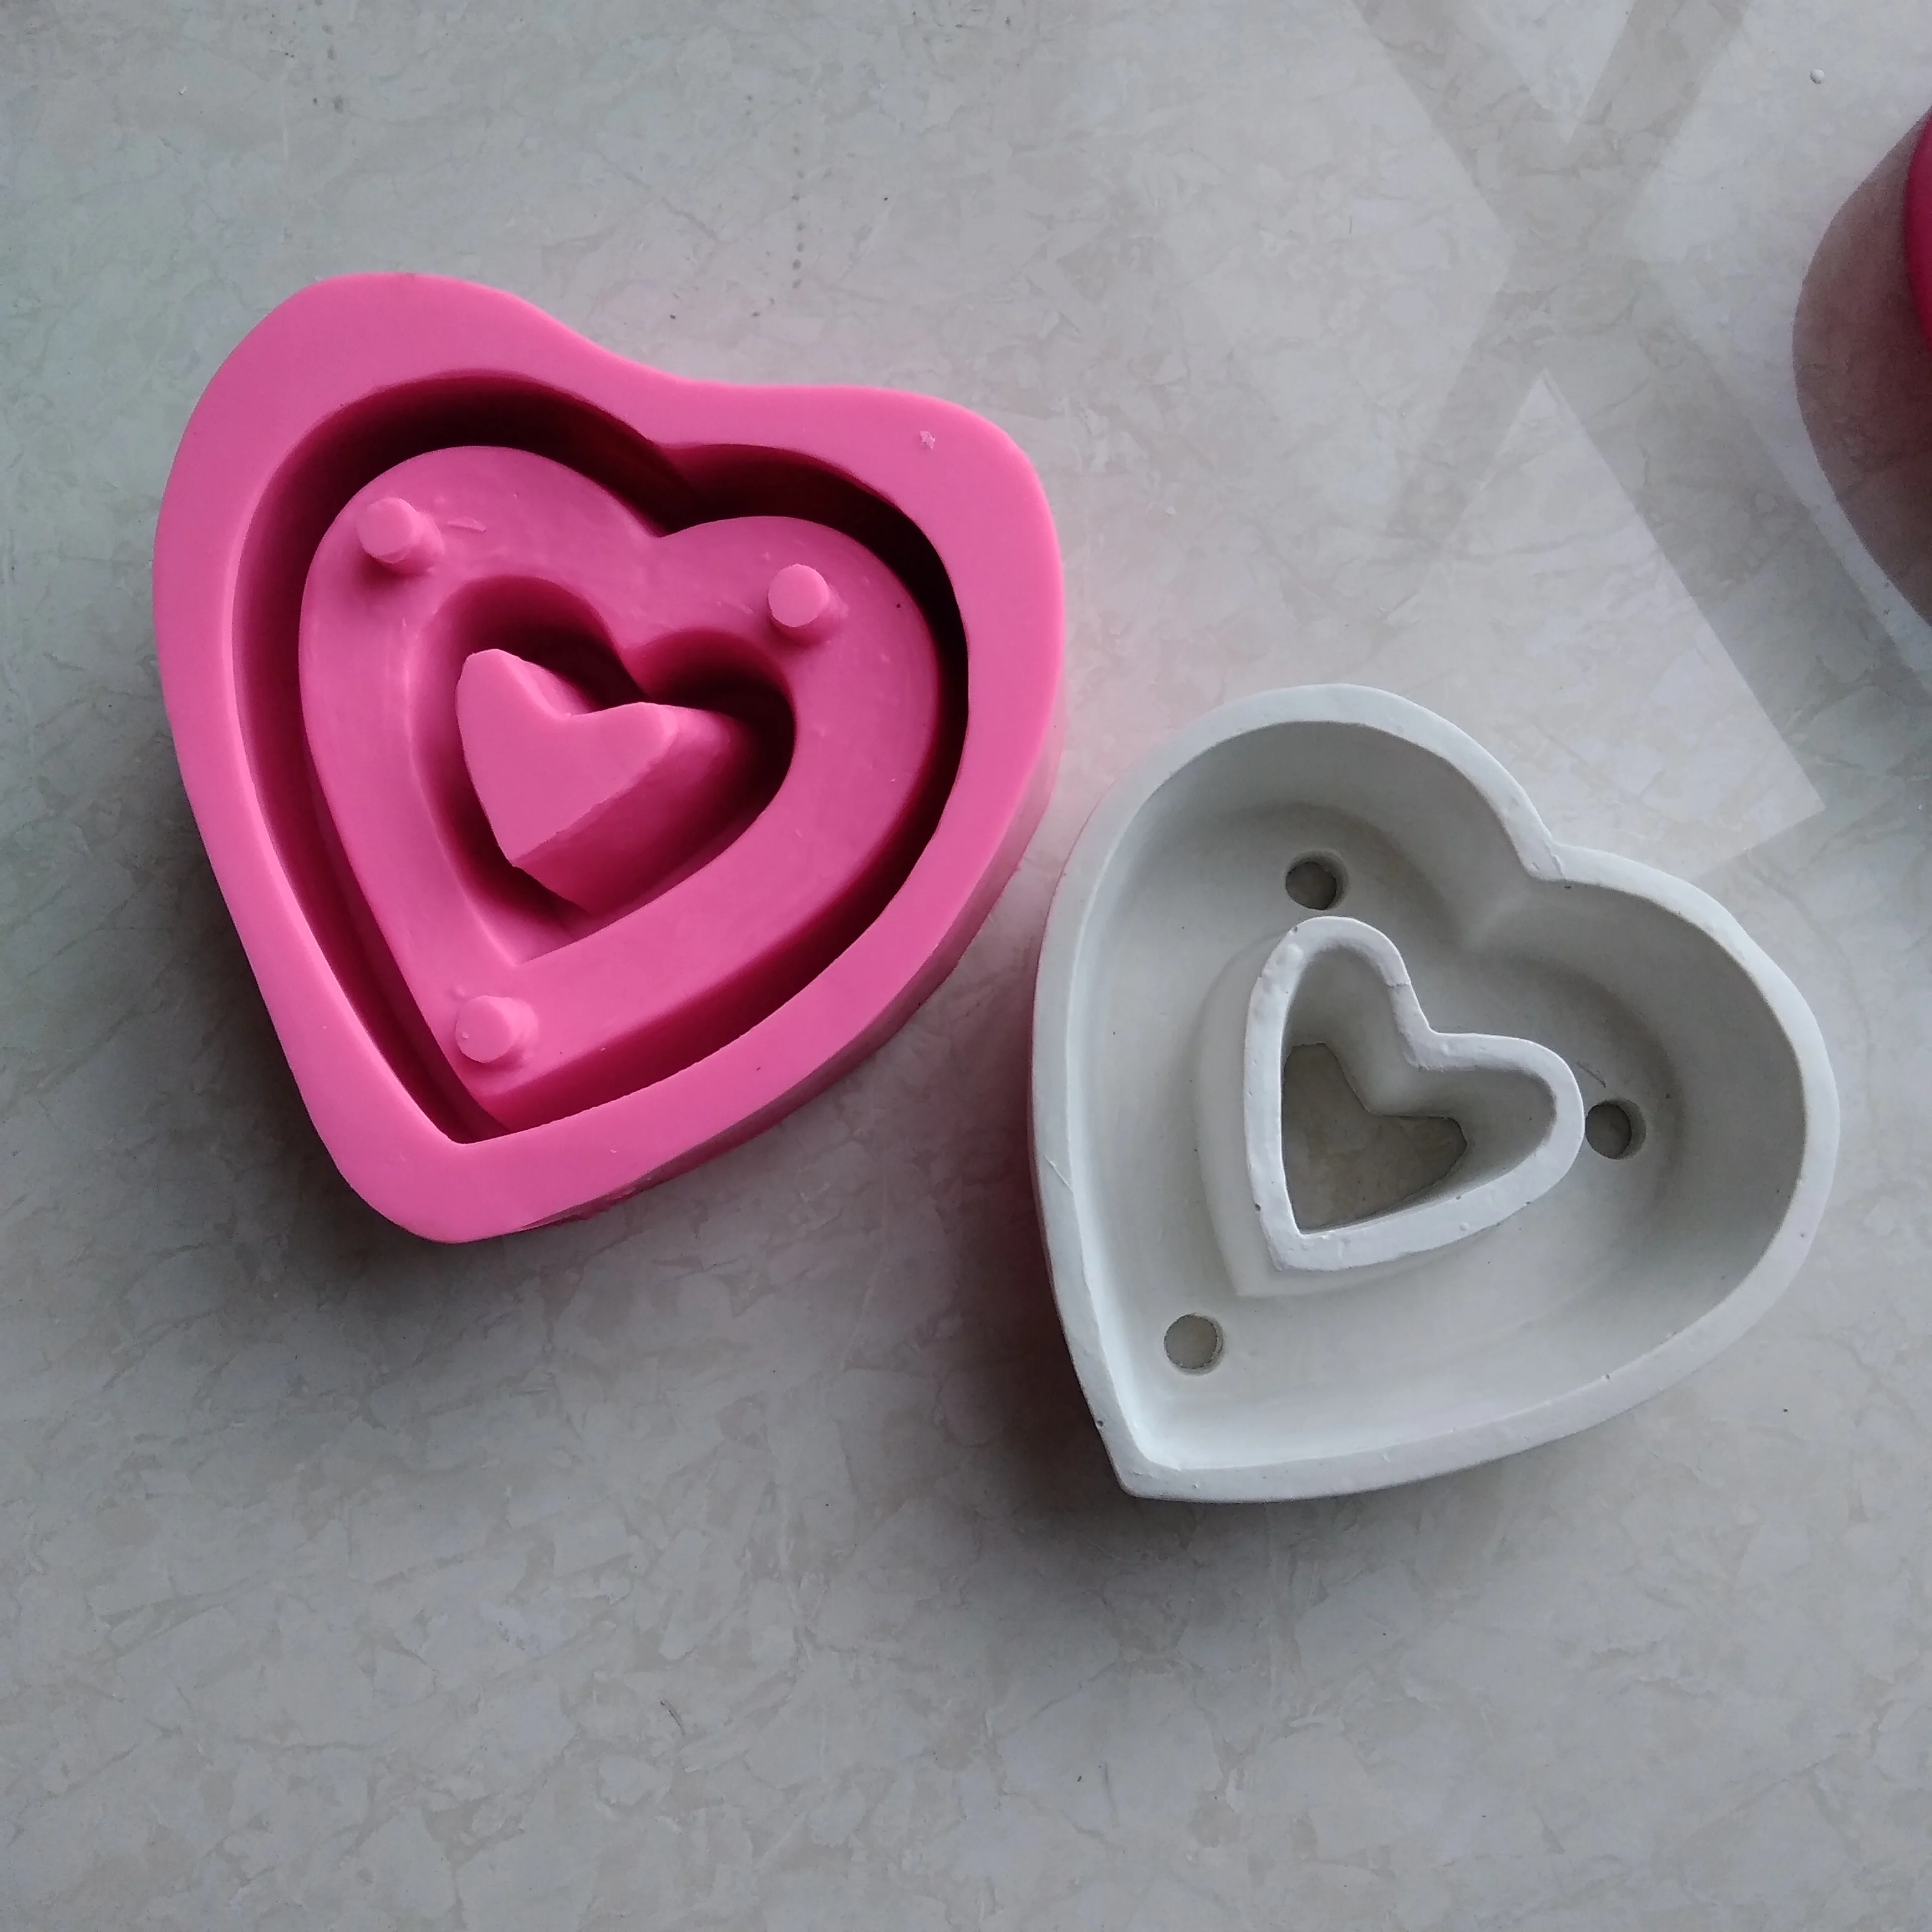 Love Heart Flower Pot Cake Chocolate Cement Candle Soap Resin Clay Silicone Mold